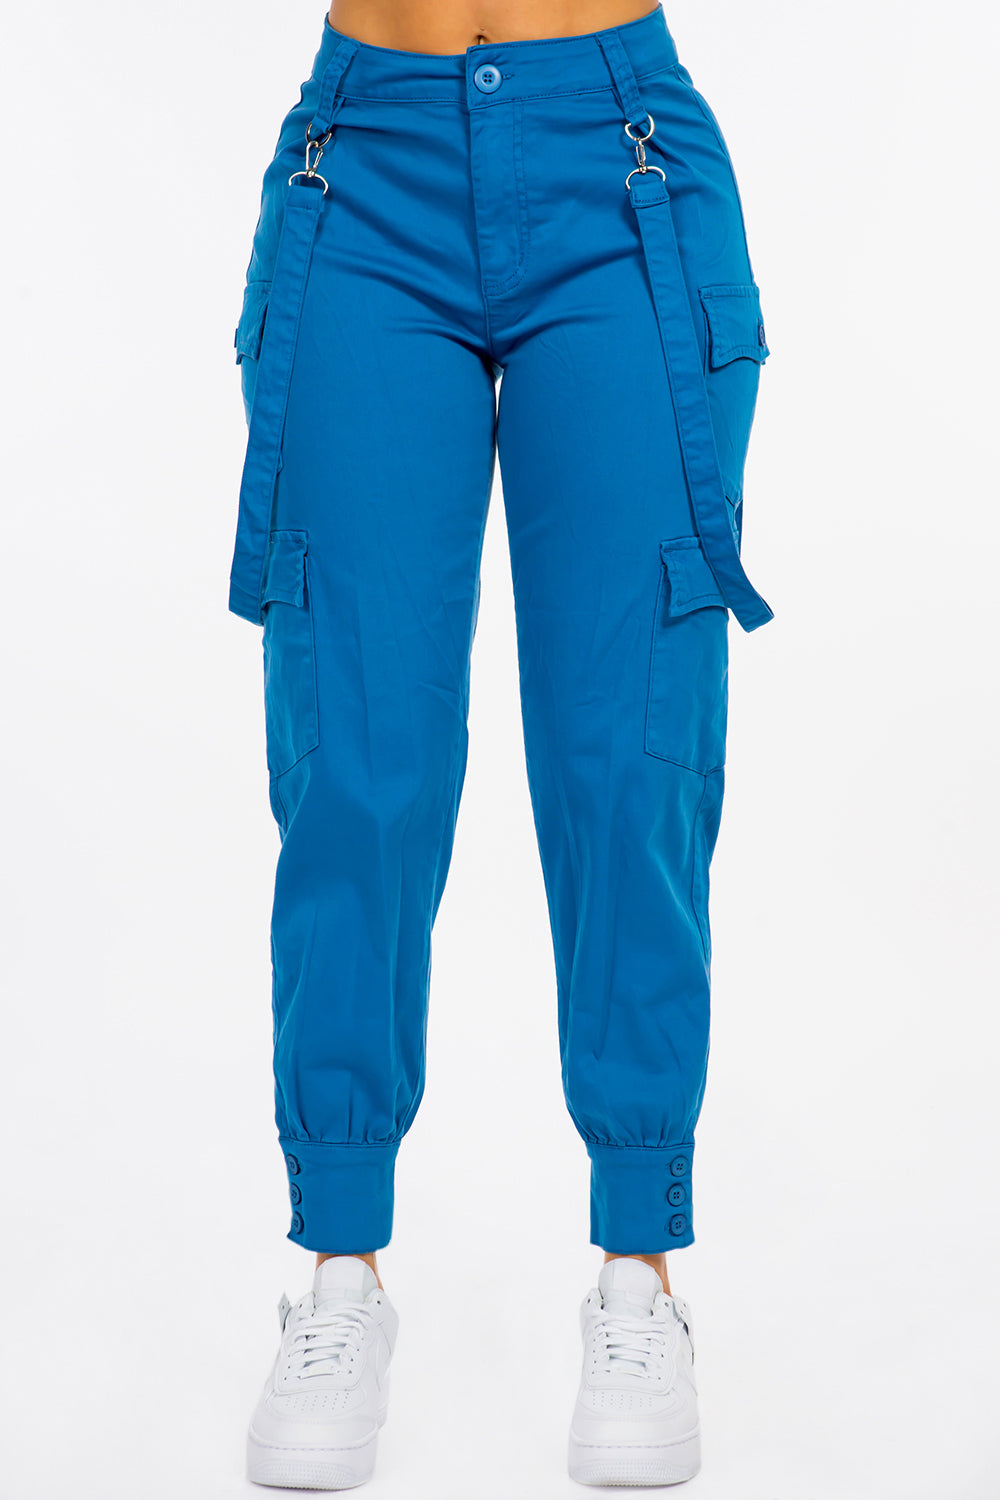 Women's High Waist Washed Cargo Pants With Suspenders | Love Moda